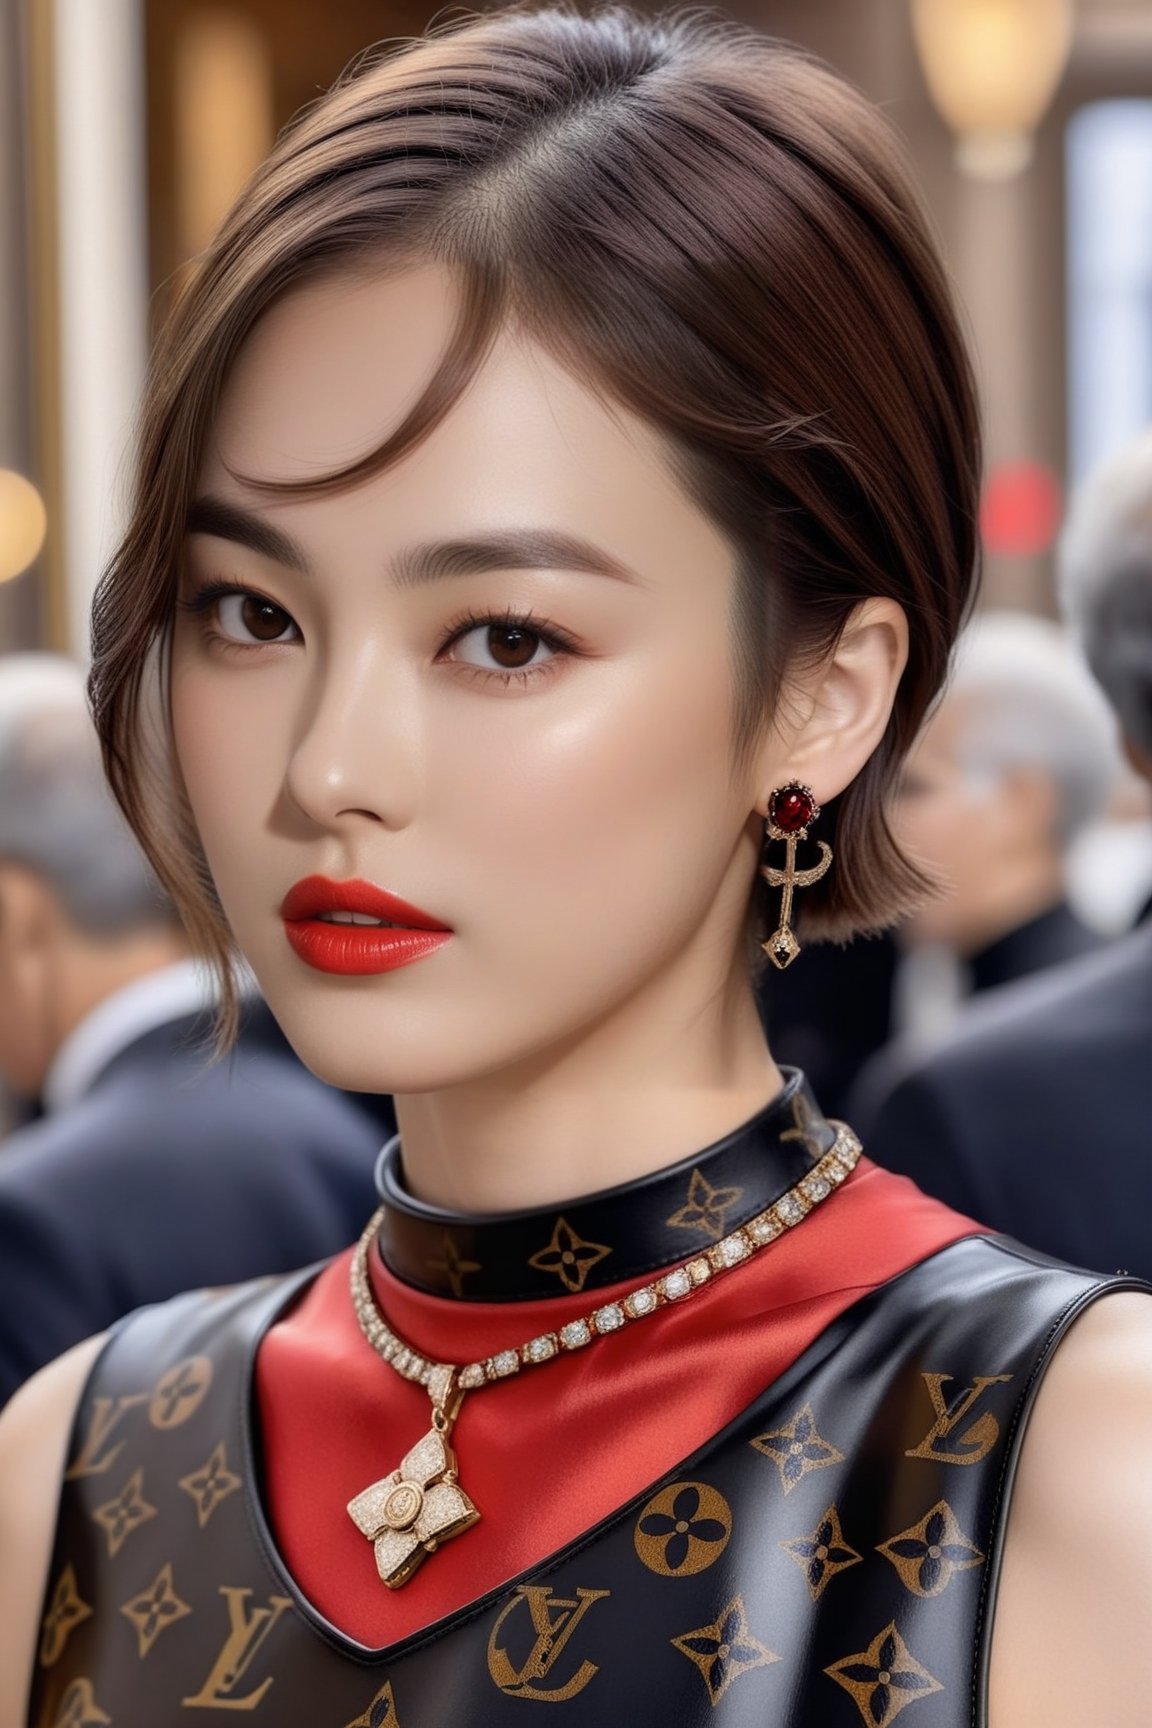 Hyper-Realistic photo of a girl,20yo,1girl,perfect female form,perfect body proportion,perfect anatomy,[red and black color],elegant dress,detailed exquisite face,soft shiny skin,mesmerizing,detailed shiny short hair,small earrings,necklaces,Louis Vuitton bag,cluttered maximalism
BREAK
(rule of thirds:1.3),perfect composition,studio photo,trending on artstation,(Masterpiece,Best quality,32k,UHD:1.4),(sharp focus,high contrast,HDR,hyper-detailed,intricate details,ultra-realistic,award-winning photo,ultra-clear,kodachrome 800:1.25),(chiaroscuro lighting,soft rim lighting:1.15),by Karol Bak,Antonio Lopez,Gustav Klimt and Hayao Miyazaki,photo_b00ster,real_booster,art_booster,song-hyegyo-xl